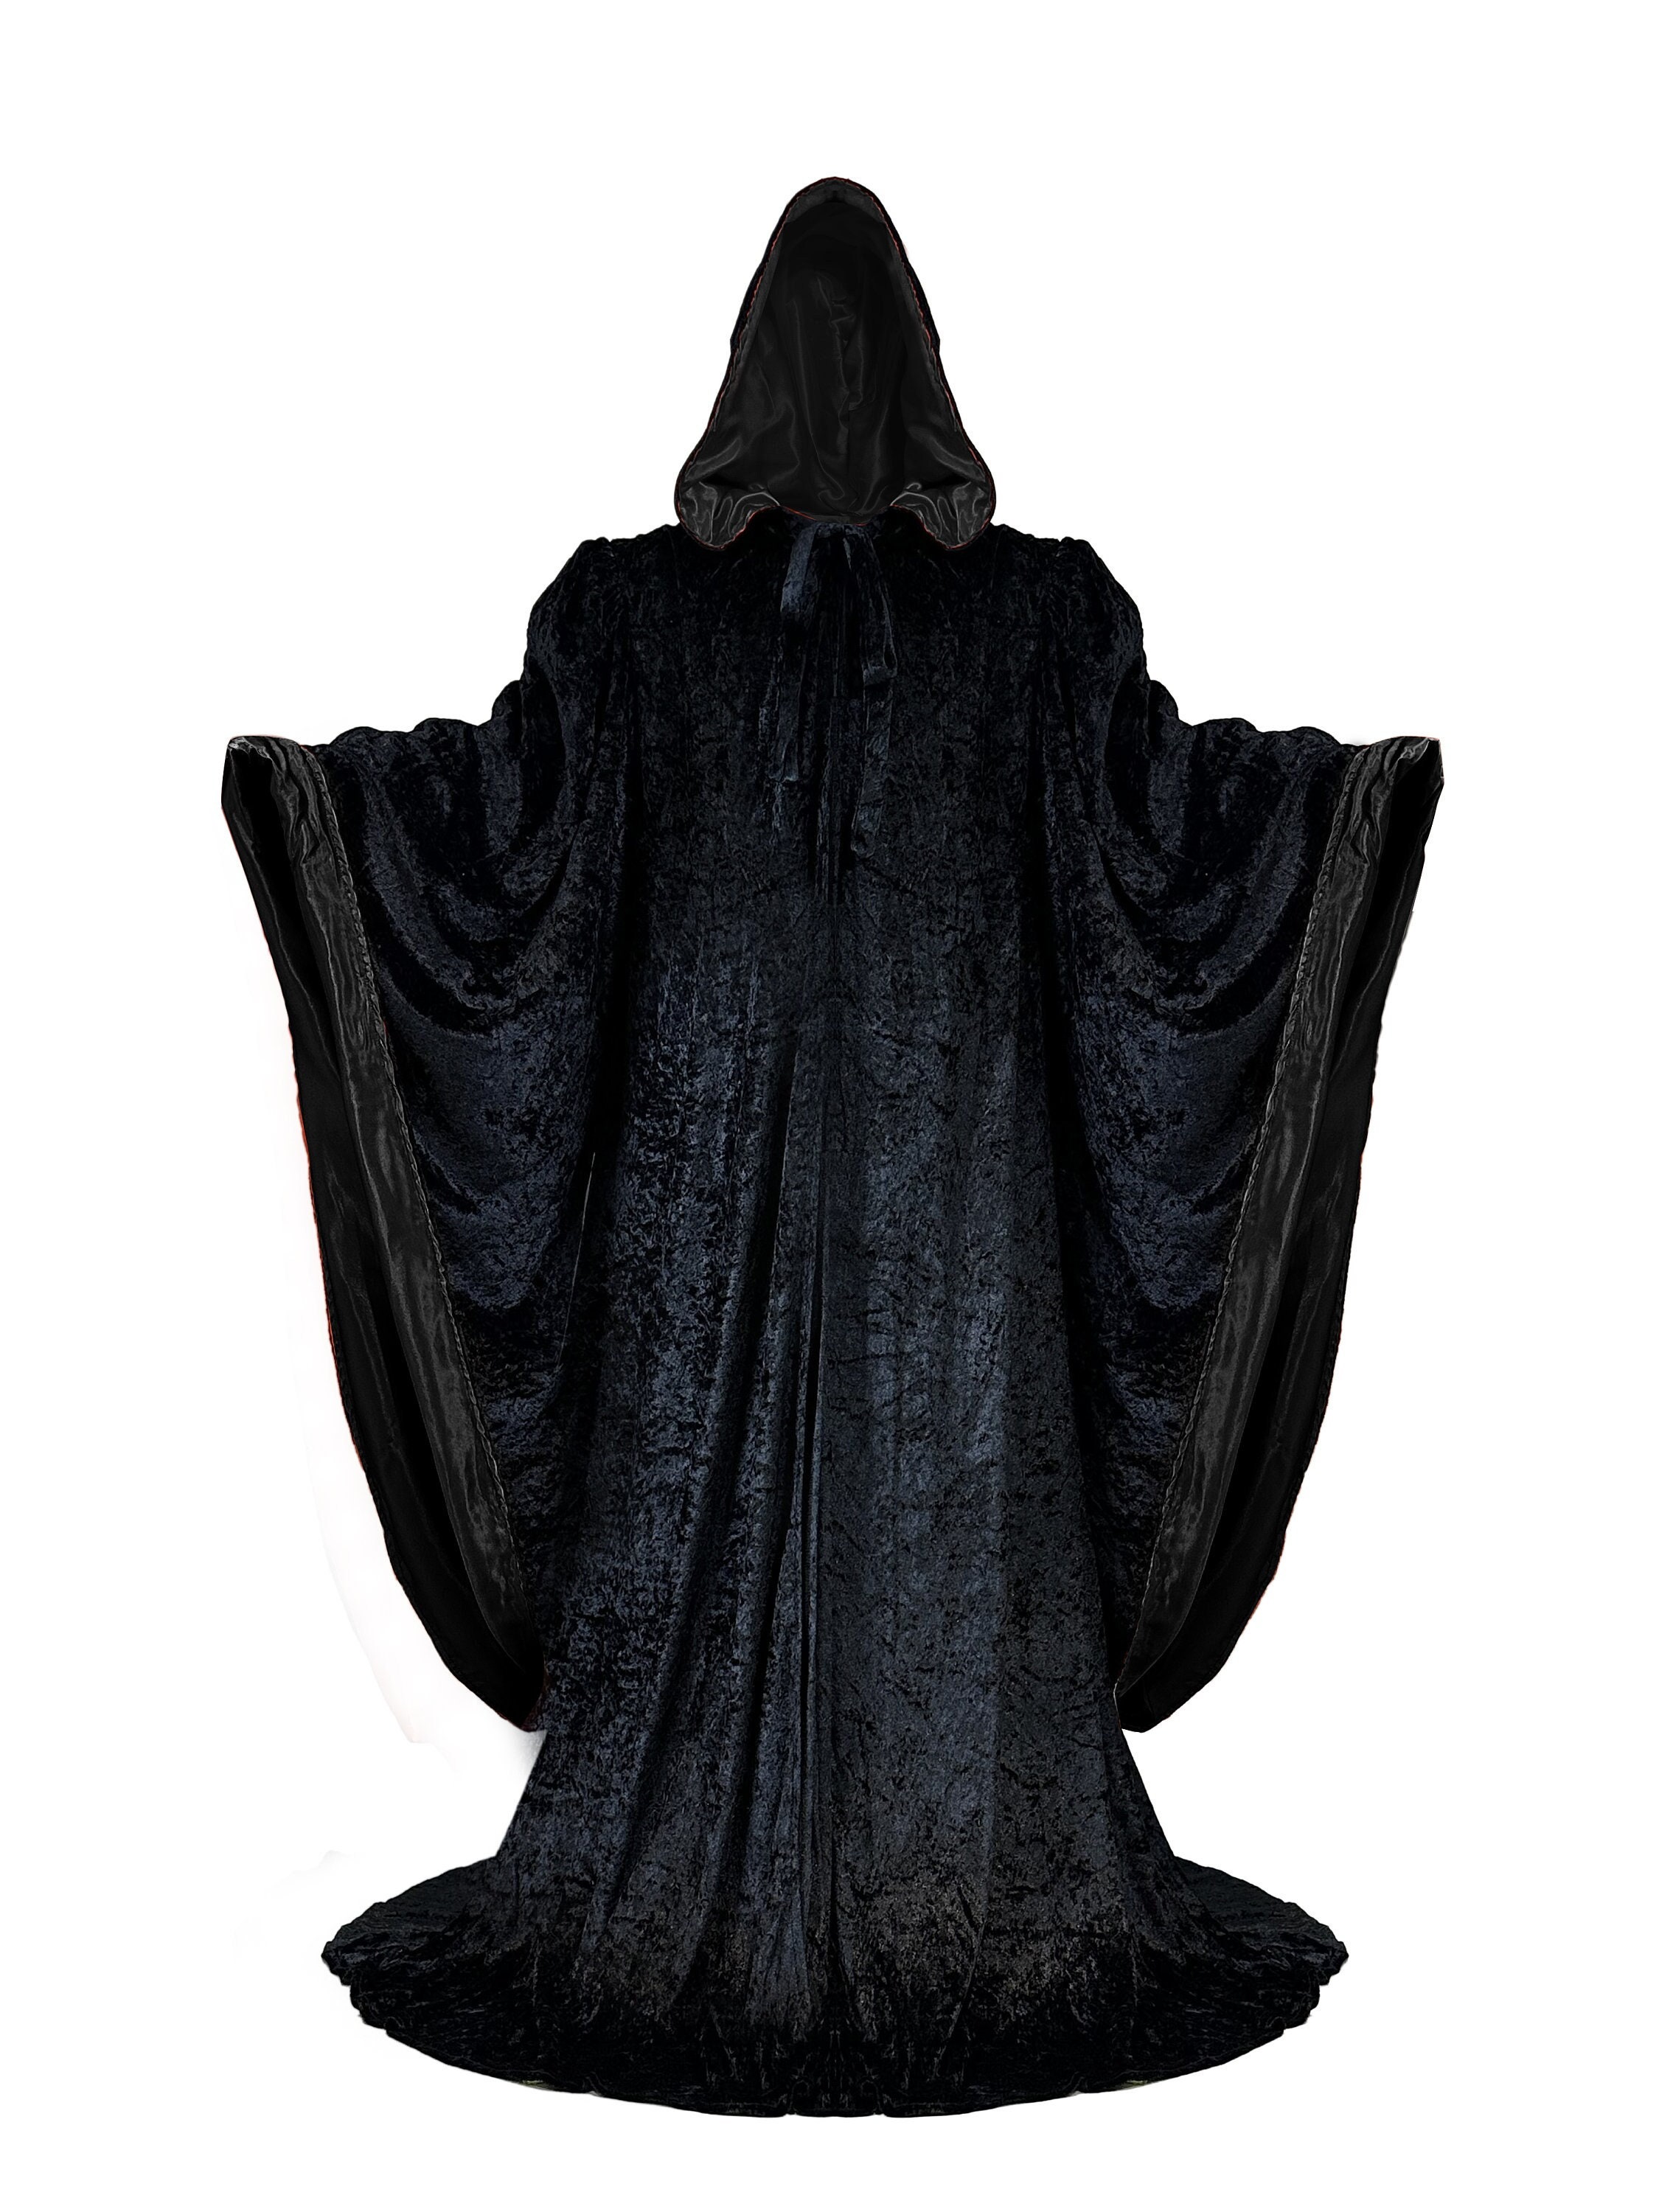 Wizard BLACK Robe With Hood and Sleeves, Velvet Halloween, Simple Costume  for Adults, Lined in BLACK Satin Cosplay, Witch, 64 Cloak GOT 